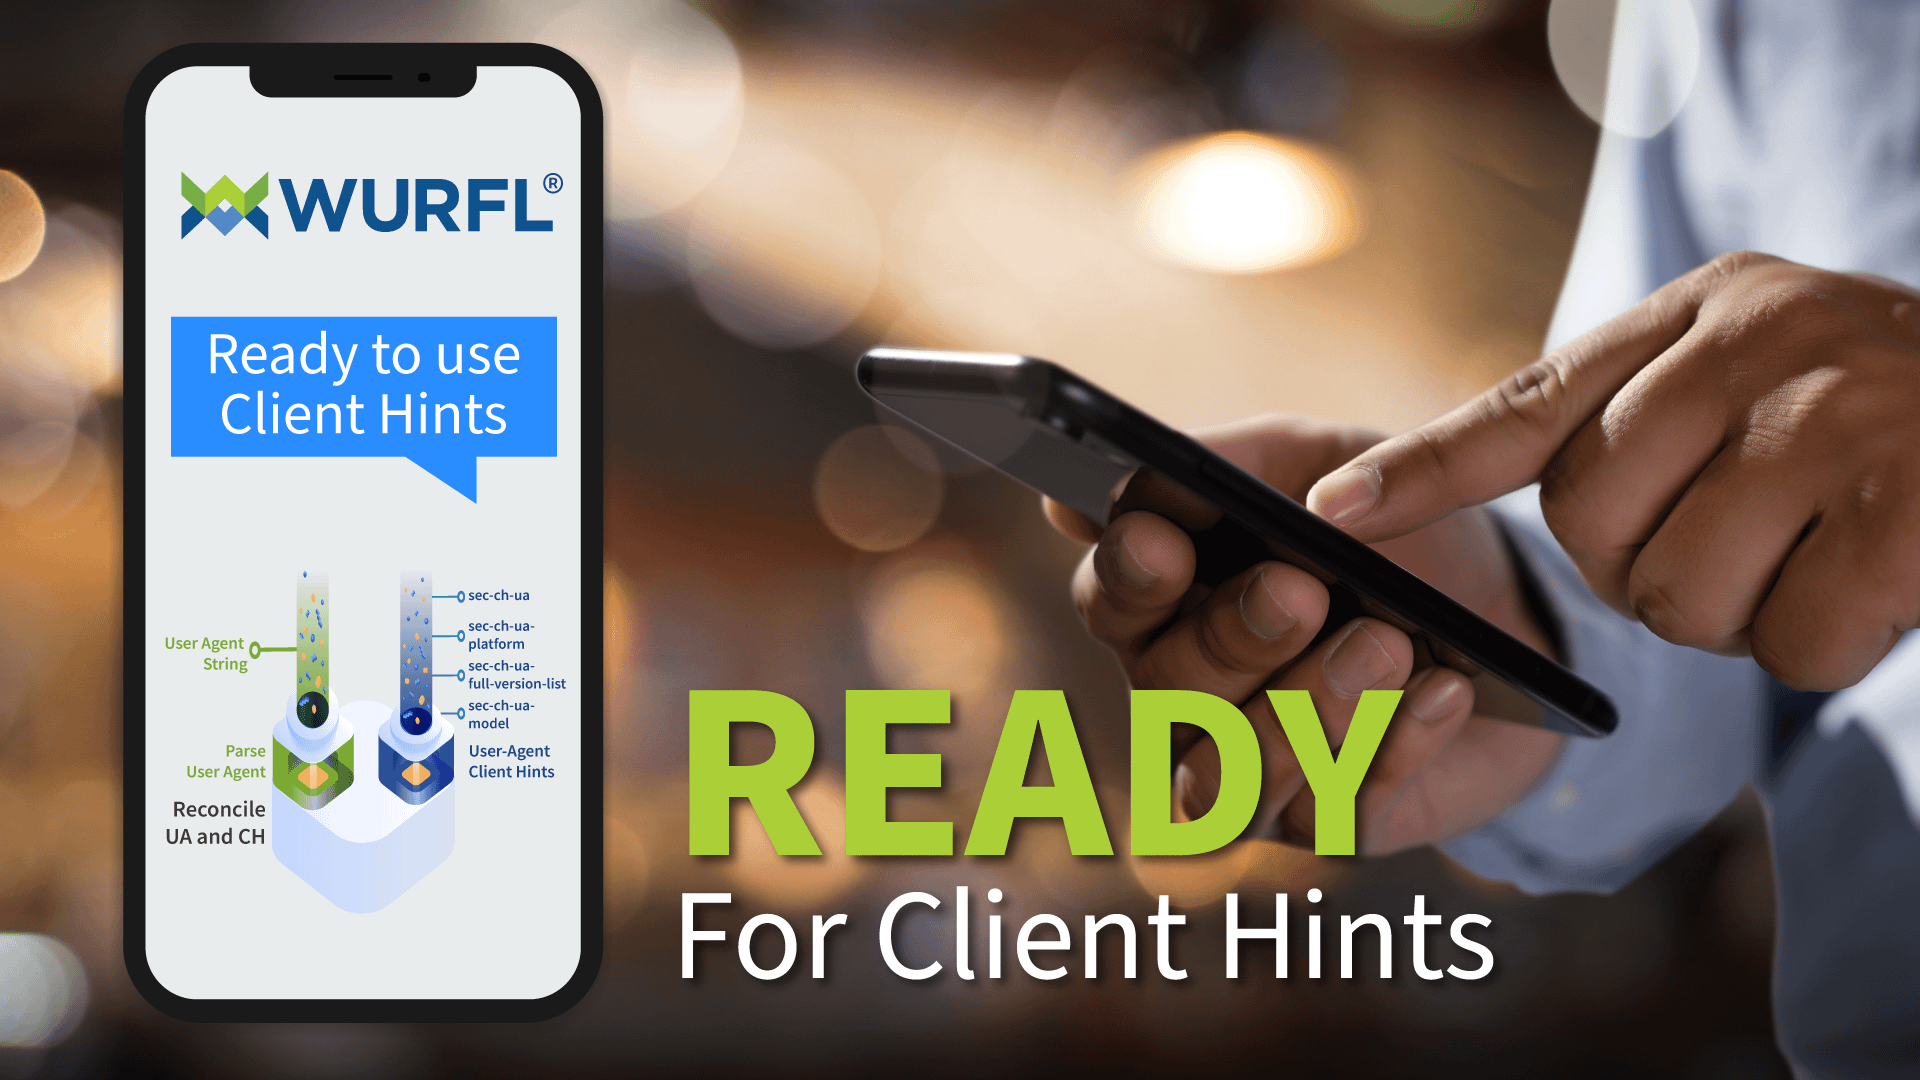 WURFL Ready for User-Agent Client Hints